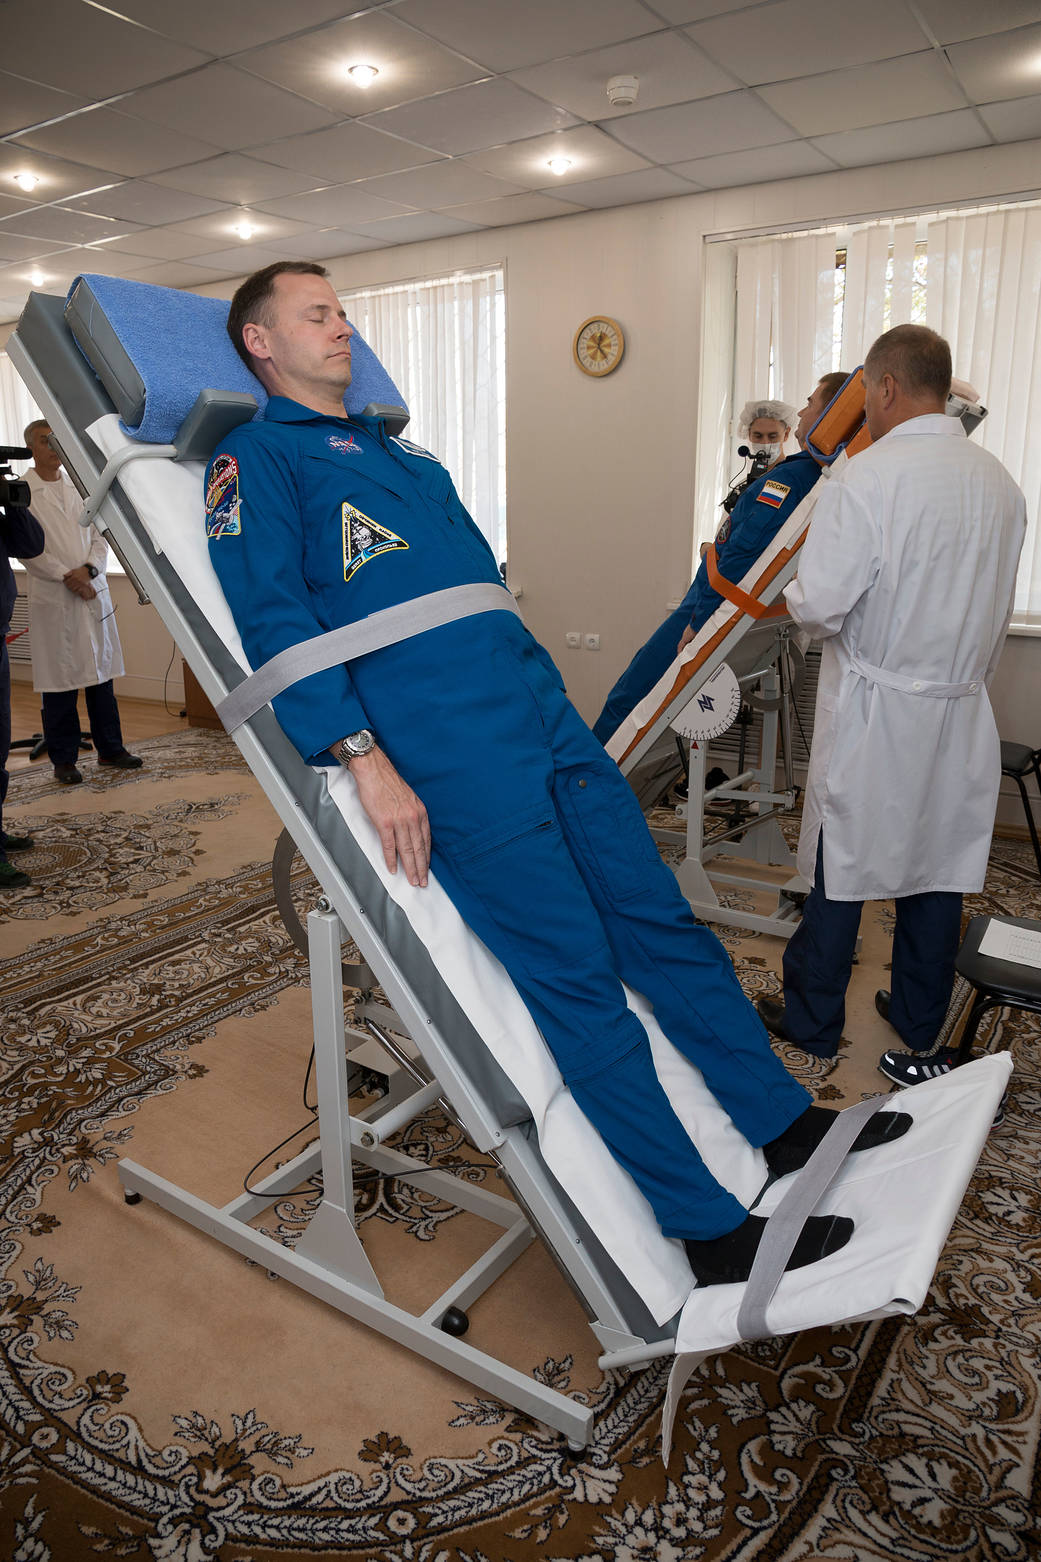 Expedition 57 crew members conduct tests of their vestibular systems